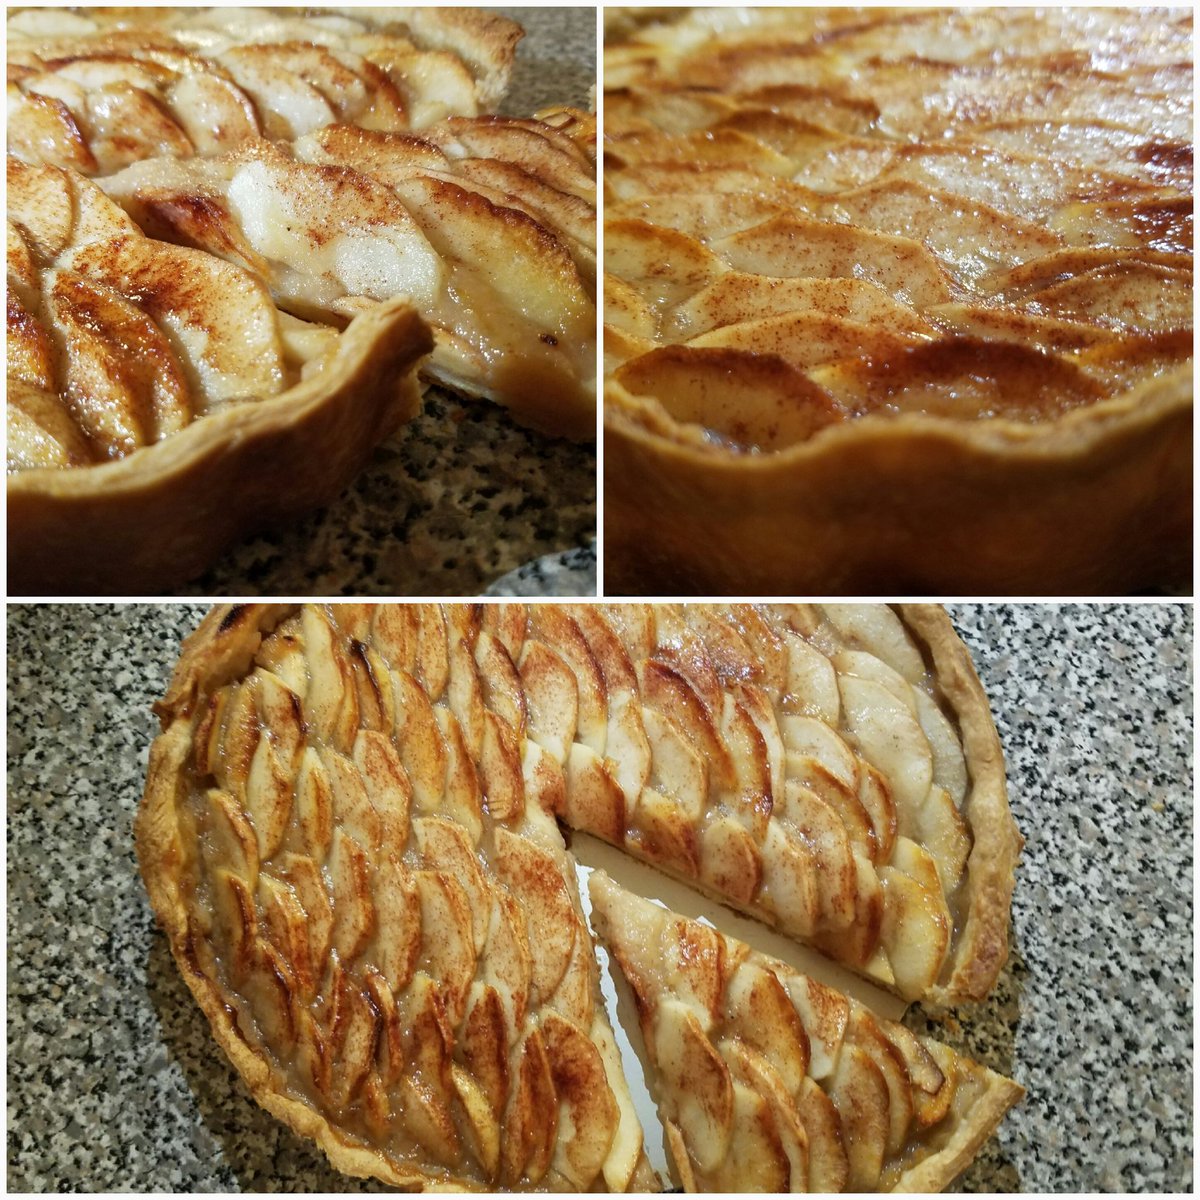 Have you ever try our French apple Tart?
#apples #tarts #handmade #tartshell #delicious #dessert #dessertmasters #localbakery #frenchbakery #food #foodies #nycfood #nycfoodies #nyceat